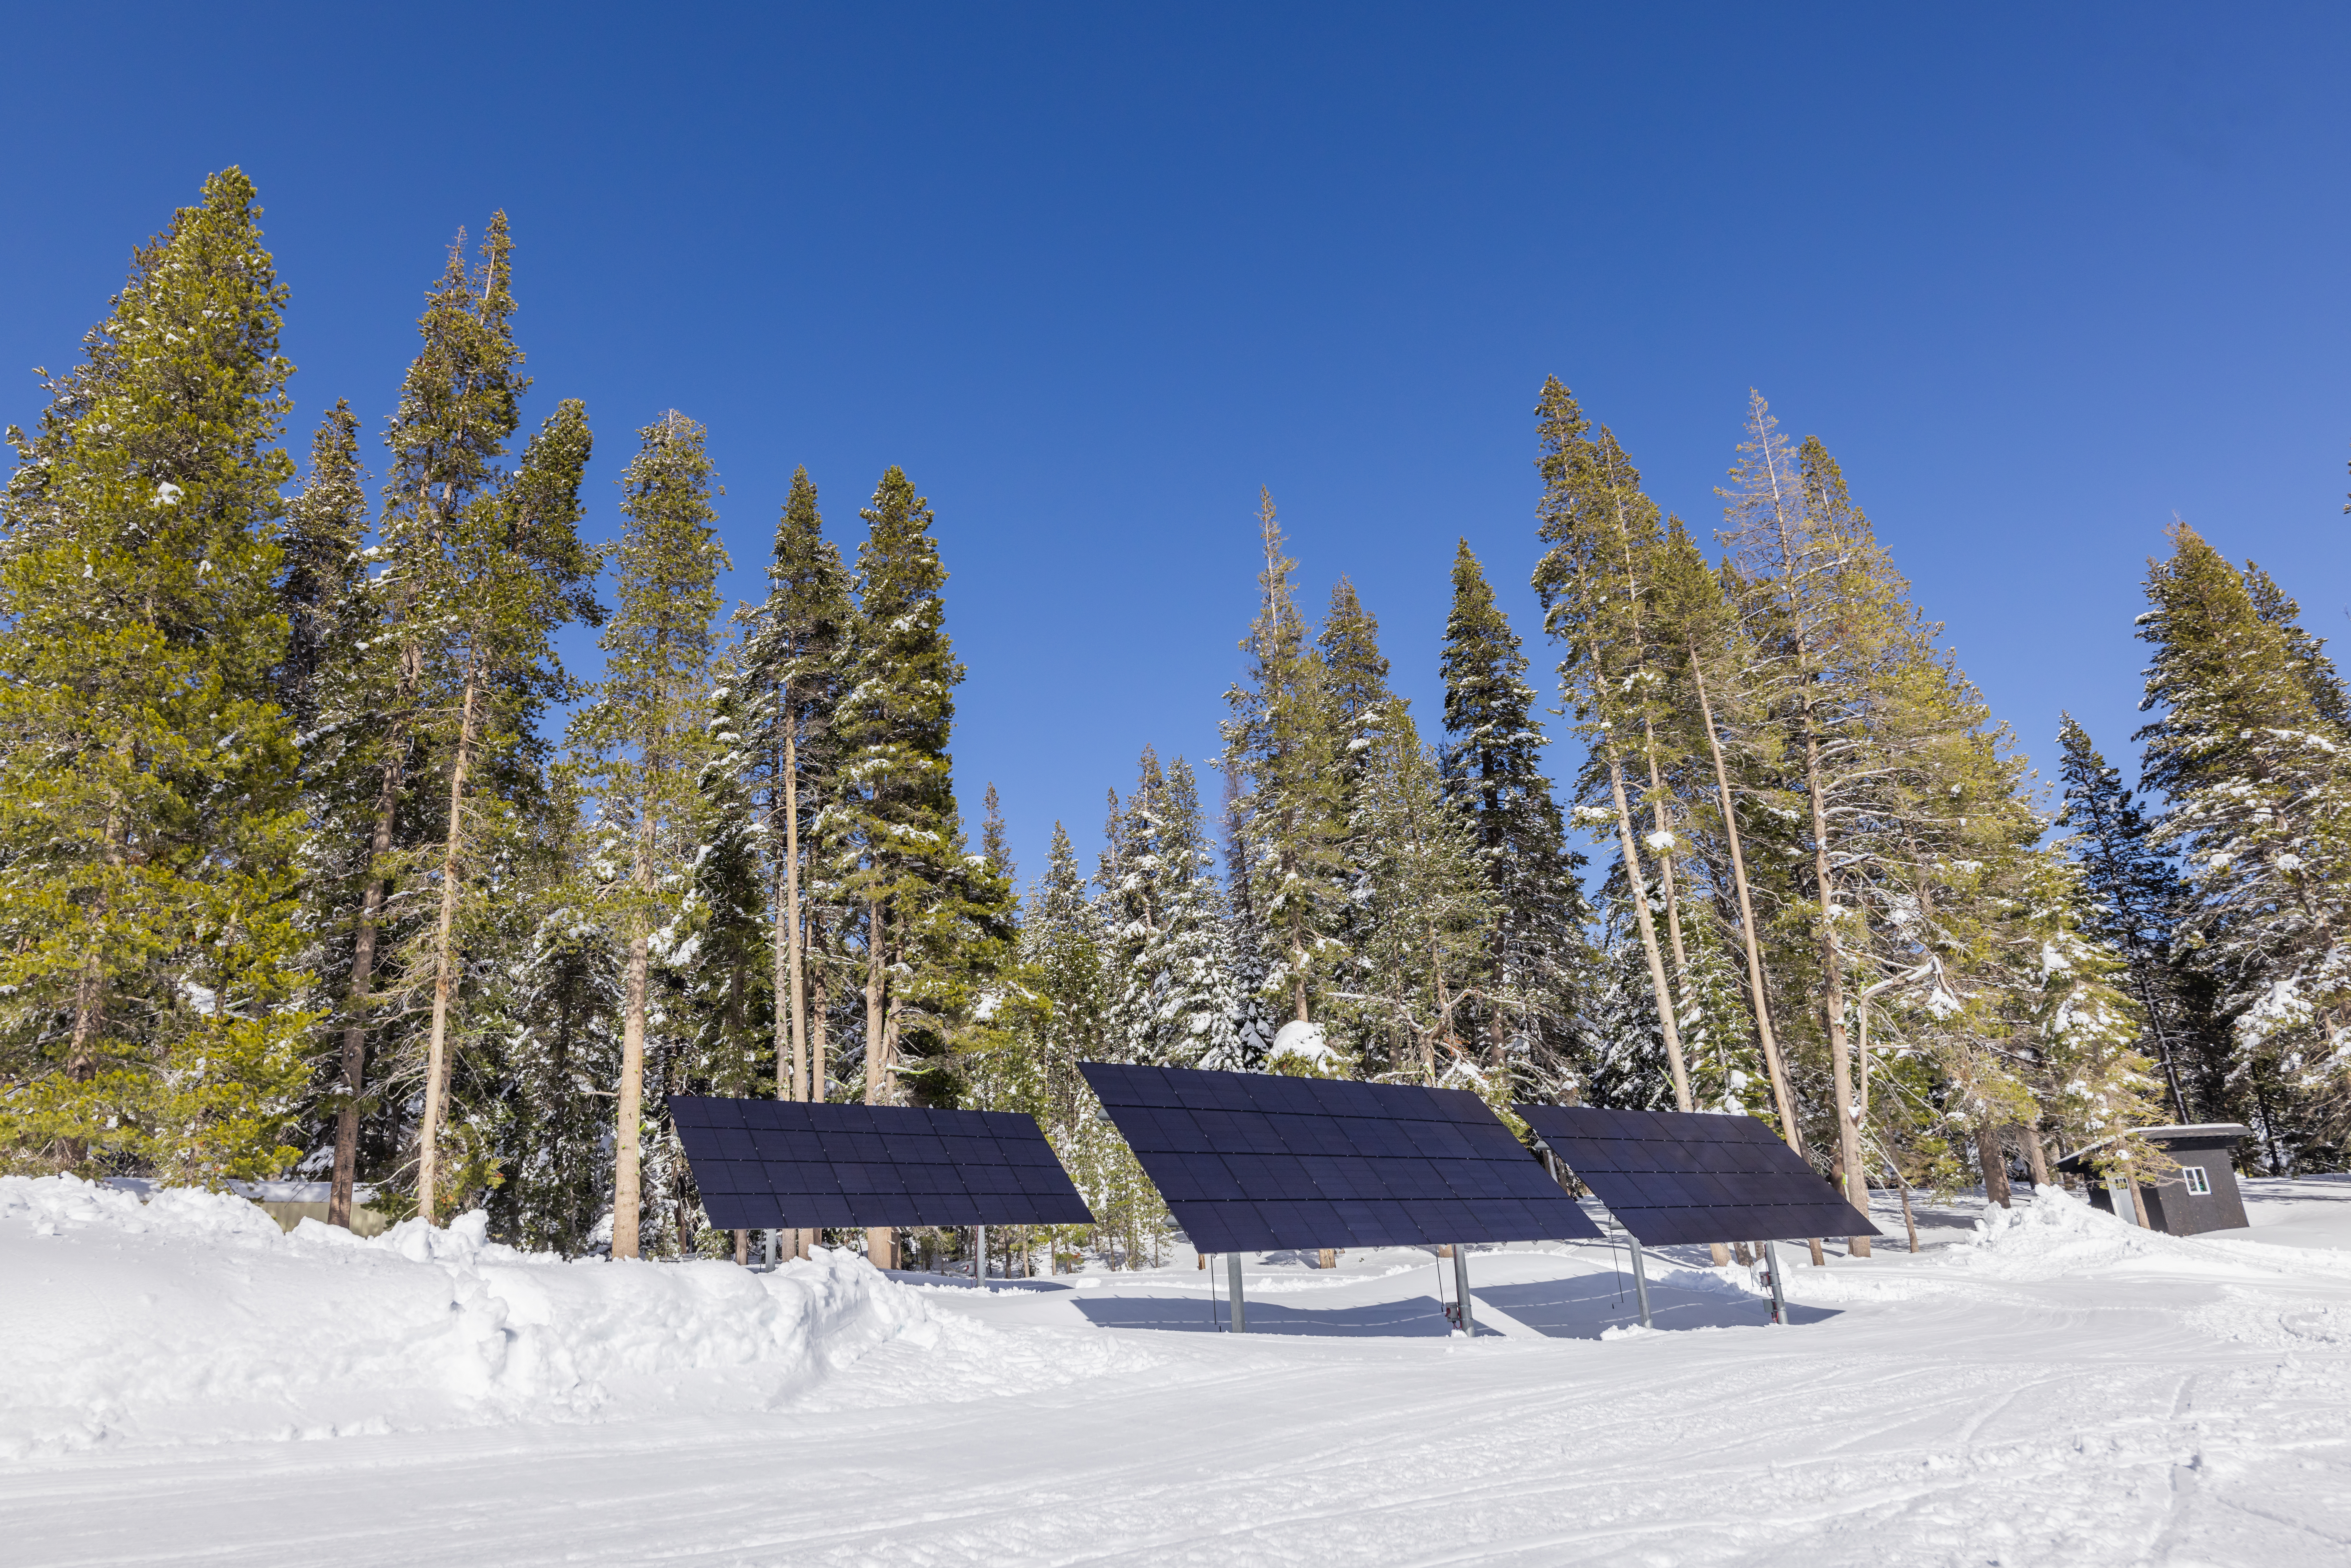 Solar Panels in the snow surrounded by trees